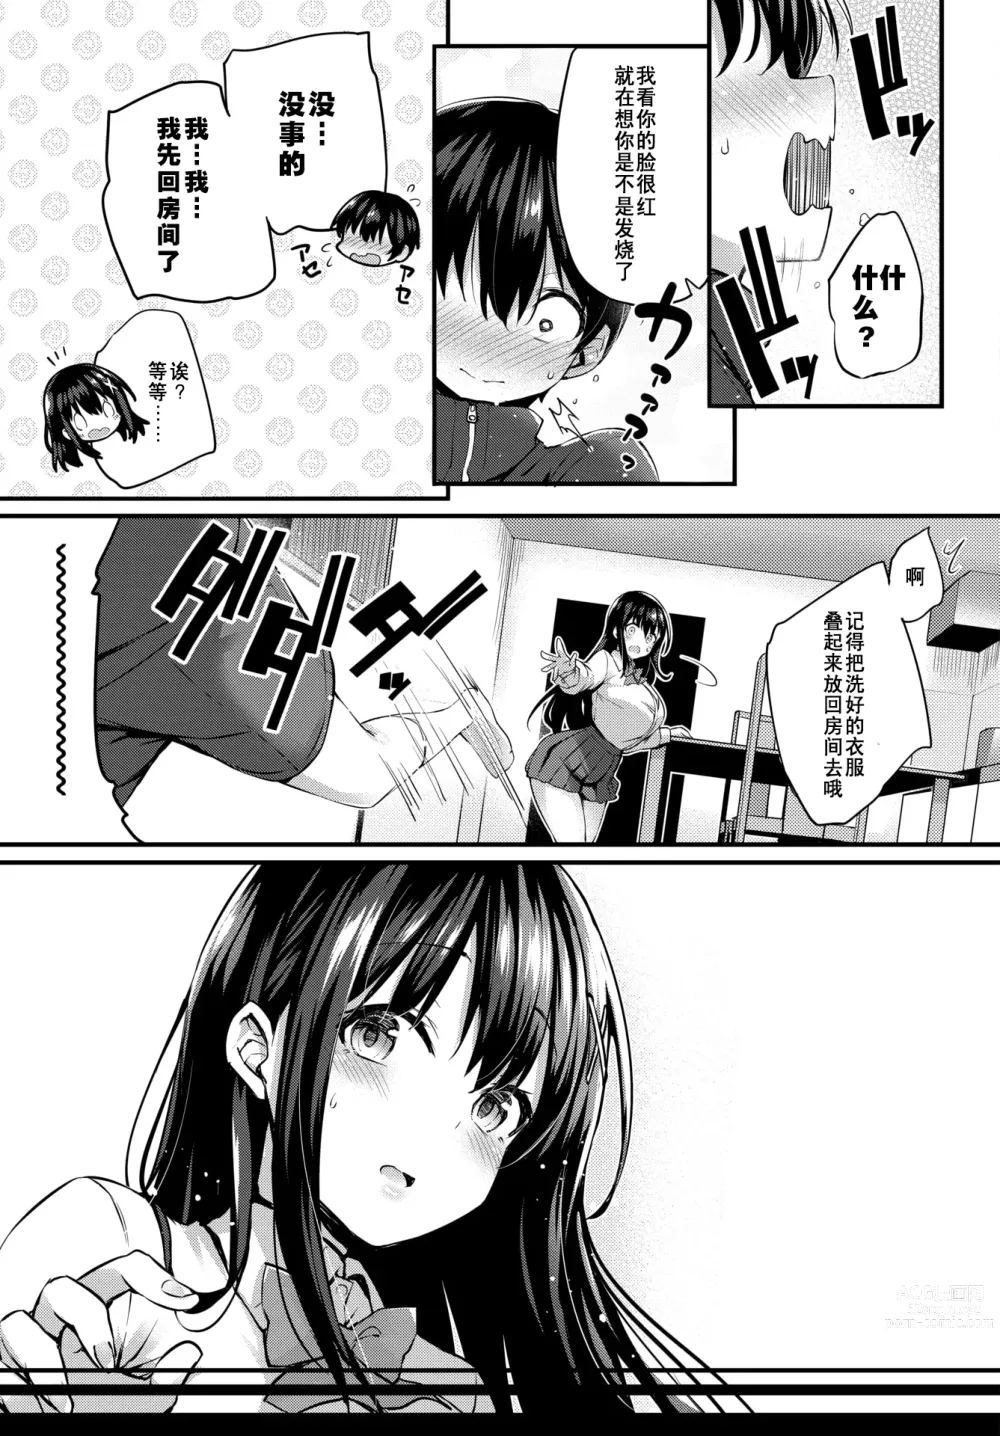 Page 6 of manga Boku no Onee-chan - My beloved was defiled and taken from me...